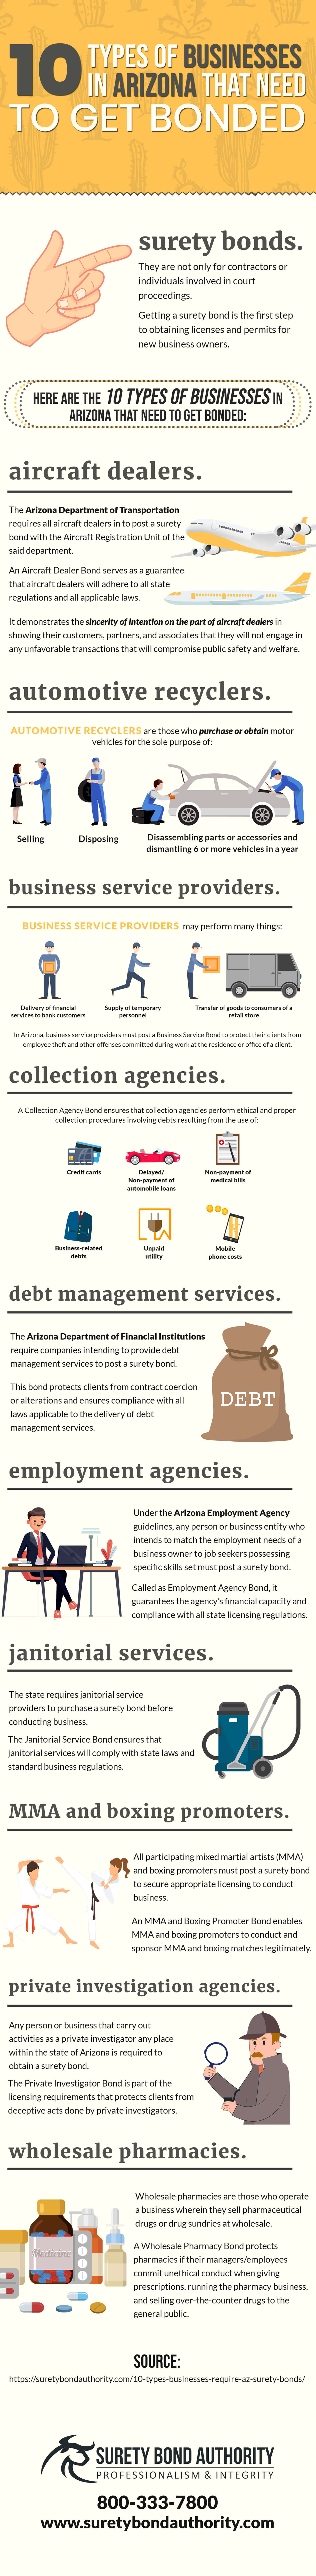 Businesses that need Surety Bonds in AZ Infographic